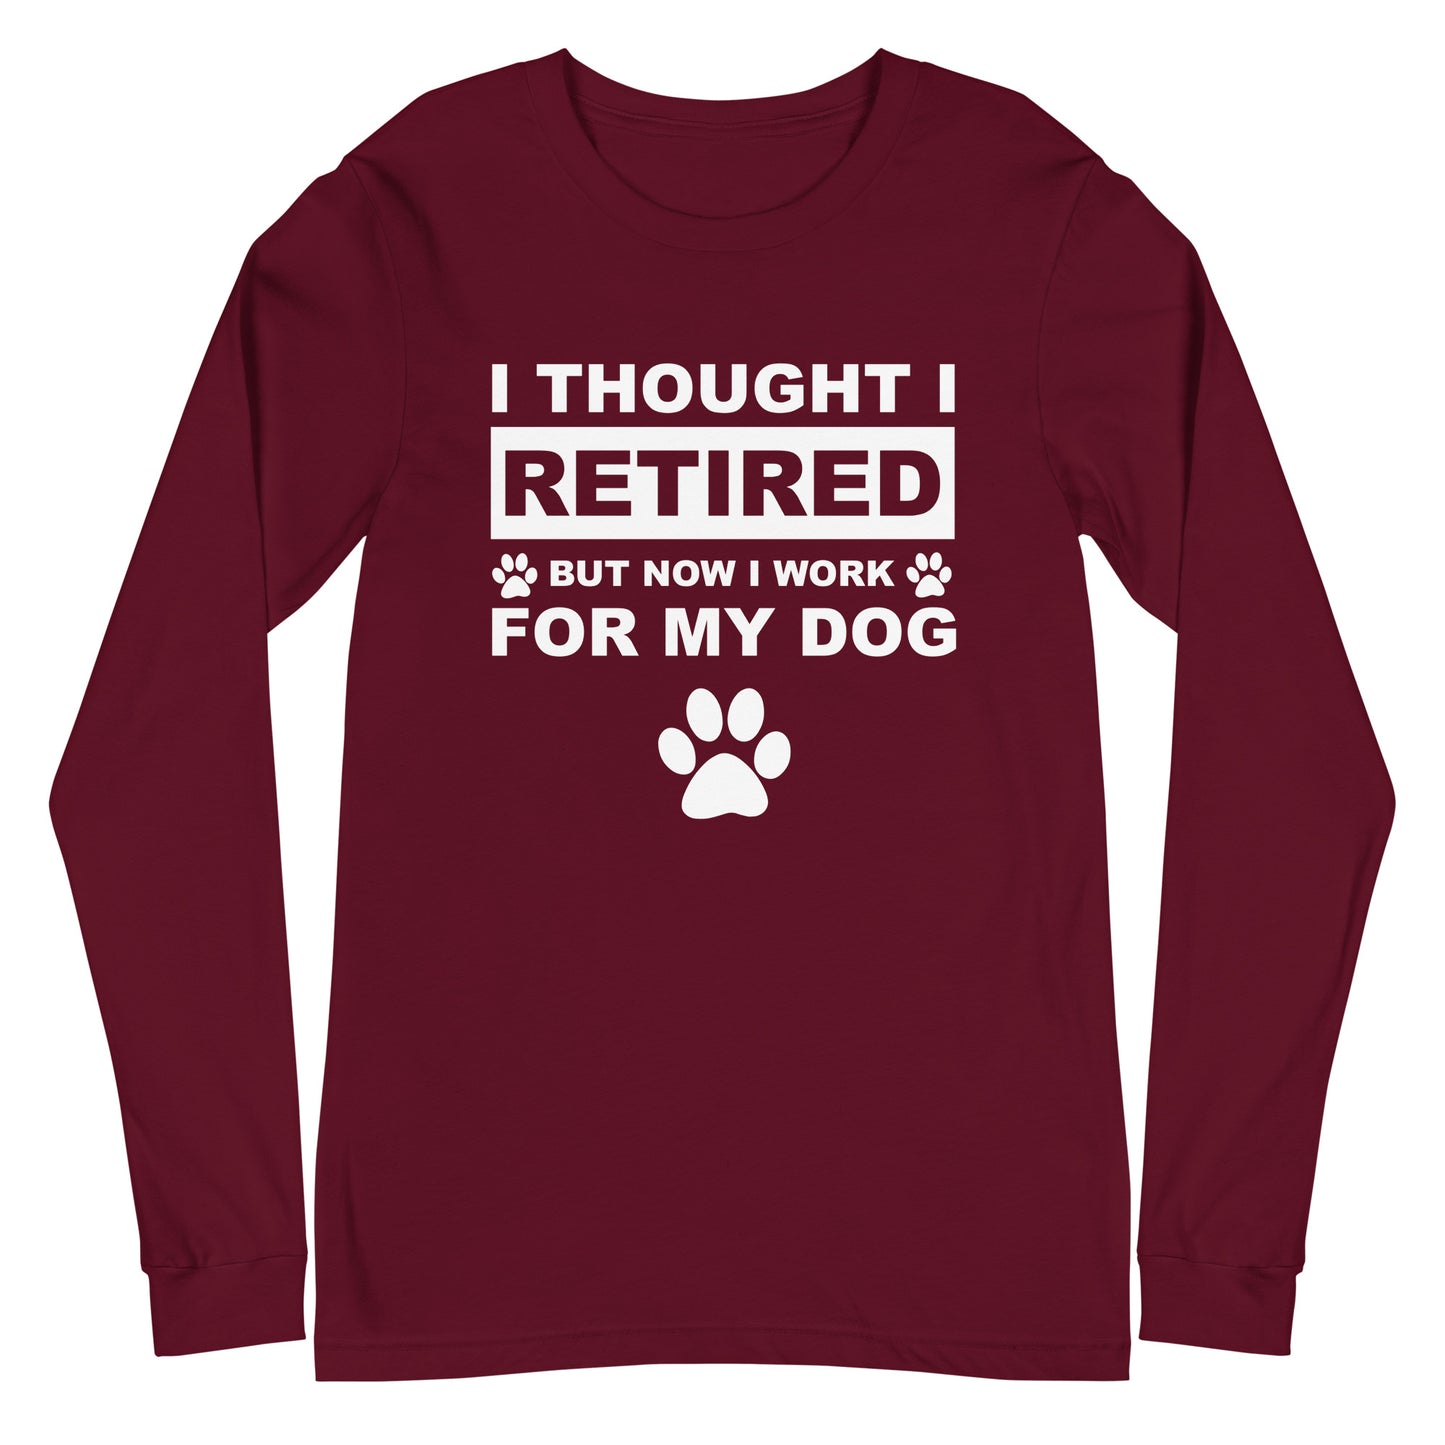 I Thought I Retired But Now I Work for My Dog Unisex Long Sleeve Tee